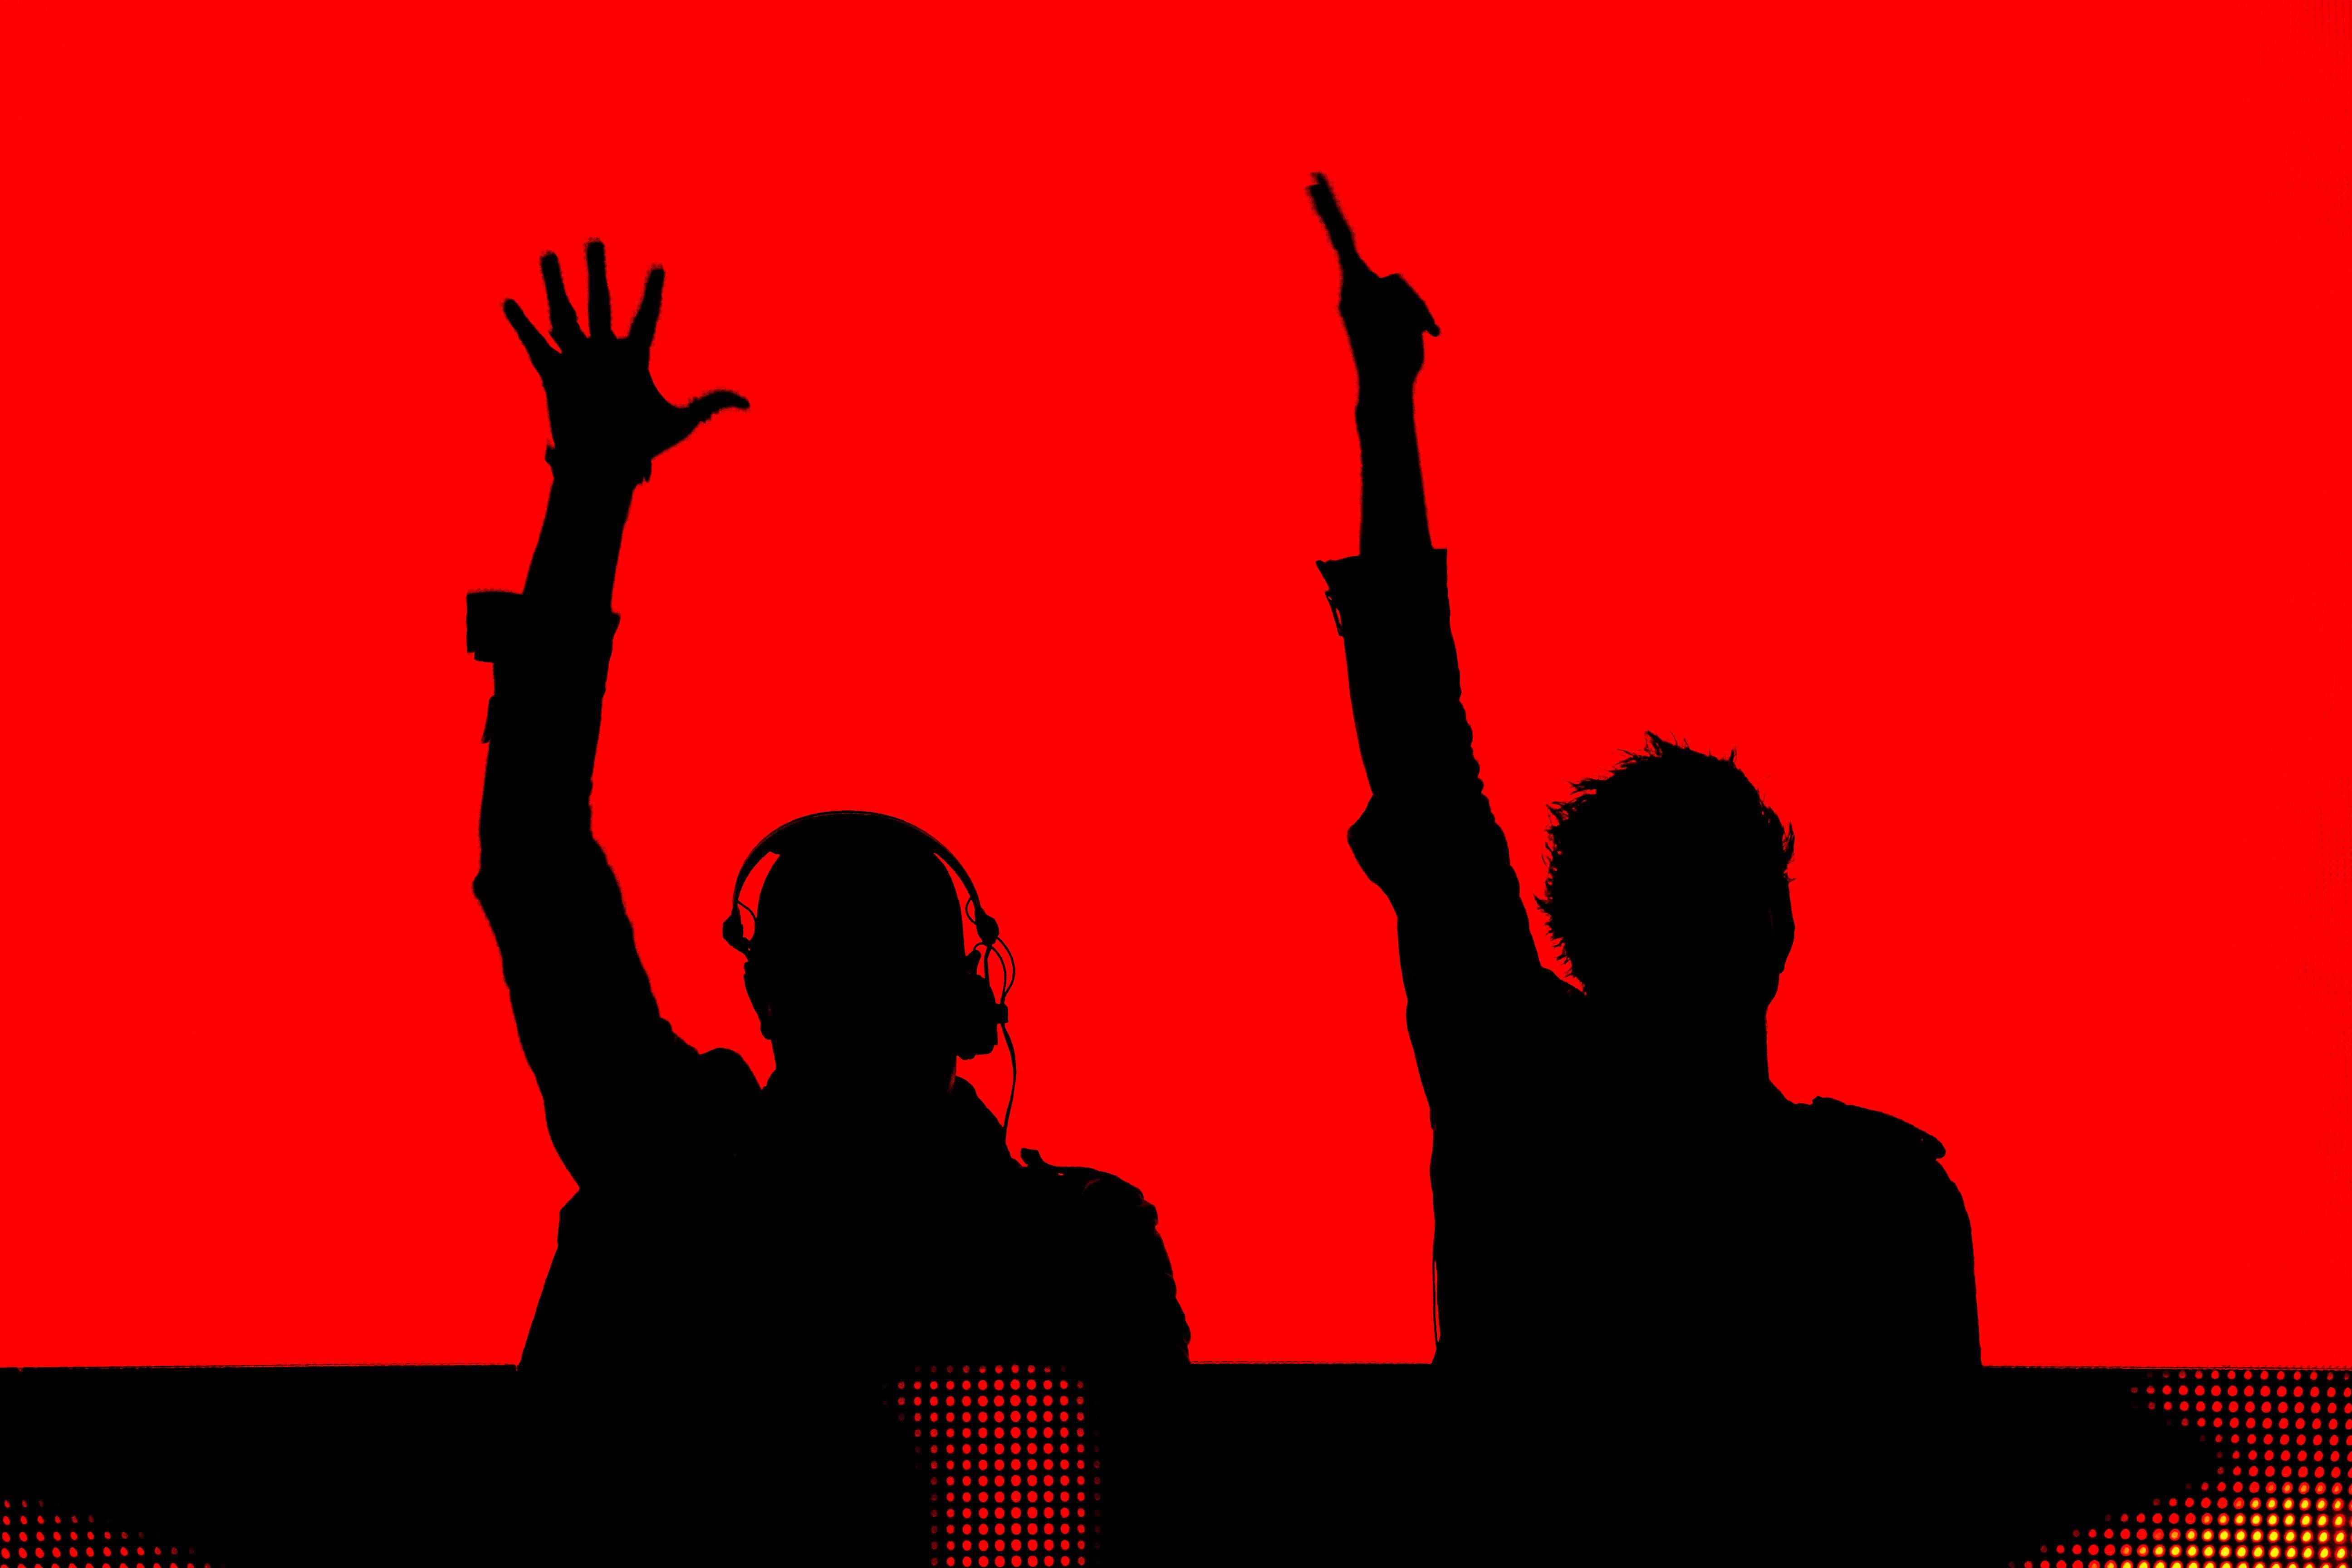 1920x1080px Knife Party 919.09 KB